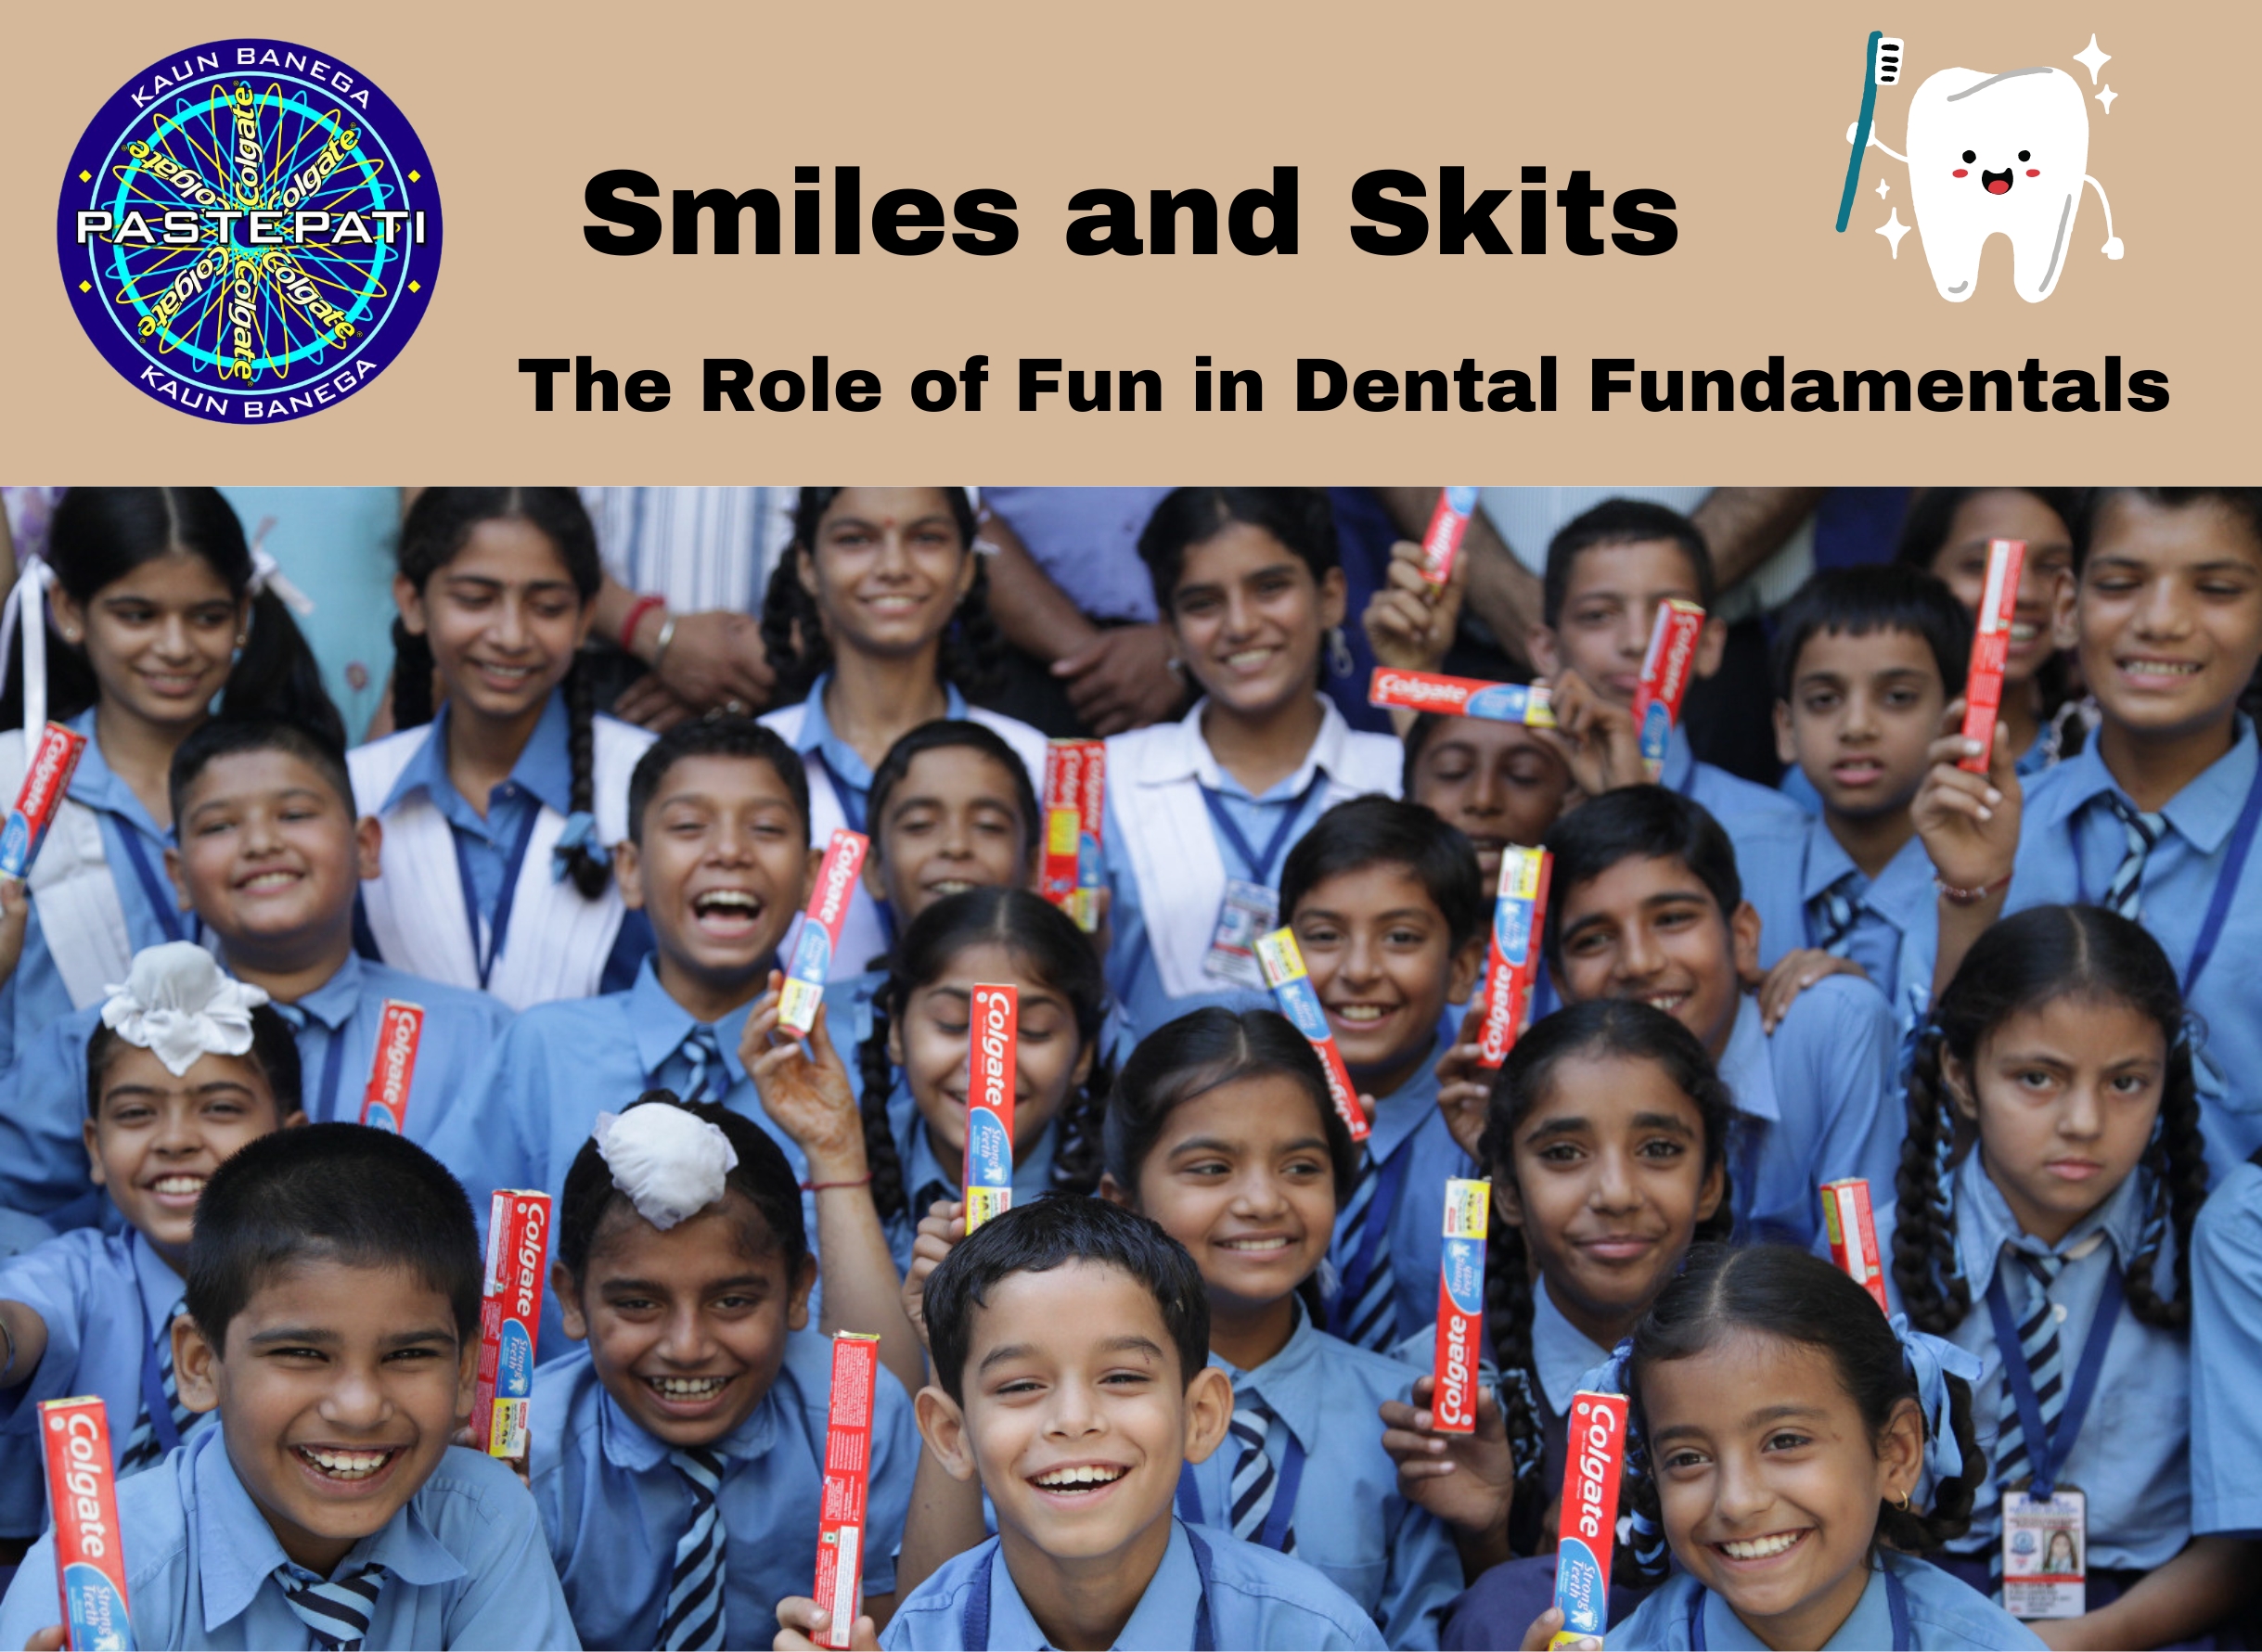 Smiles and Skits: The Role of Fun in Dental Fundamentals